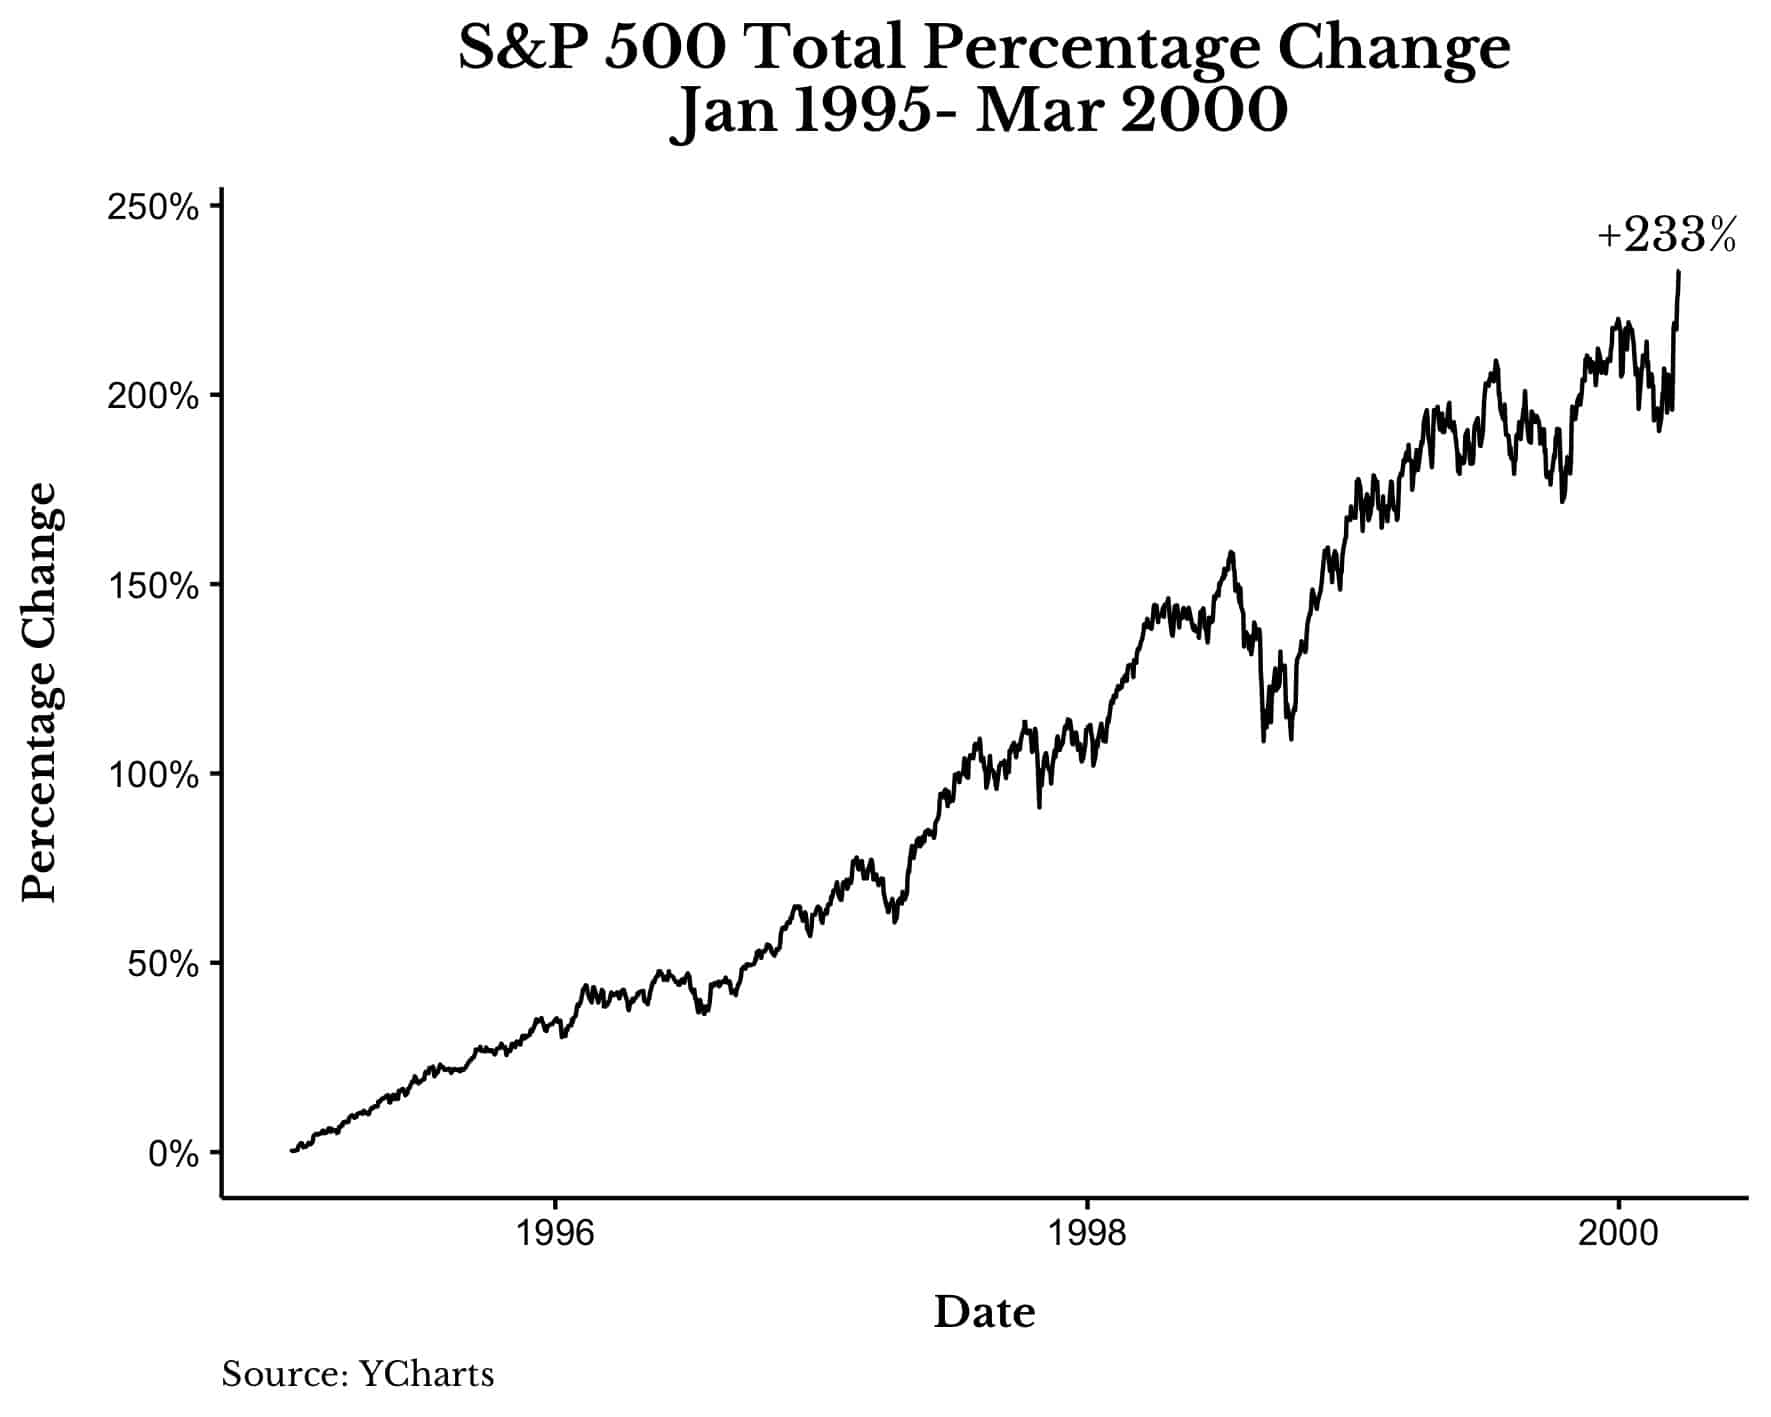 S&P 500 total percentage change from Jan 1995 to Mar 2000